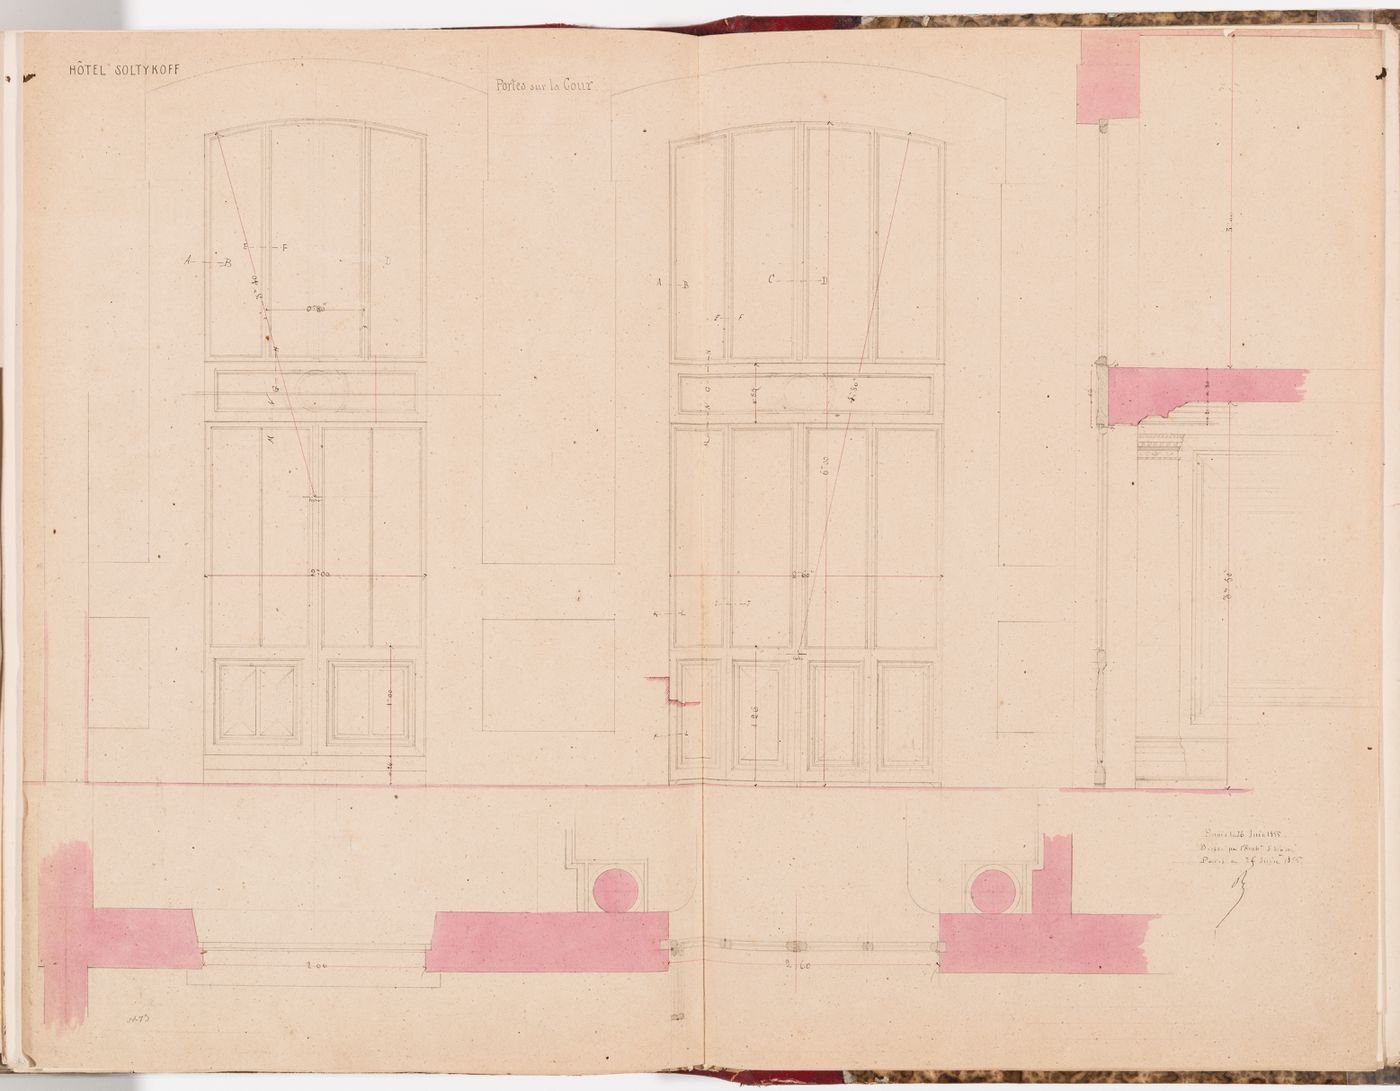 Elevation, plan and section for the courtyard doors, Hôtel Soltykoff